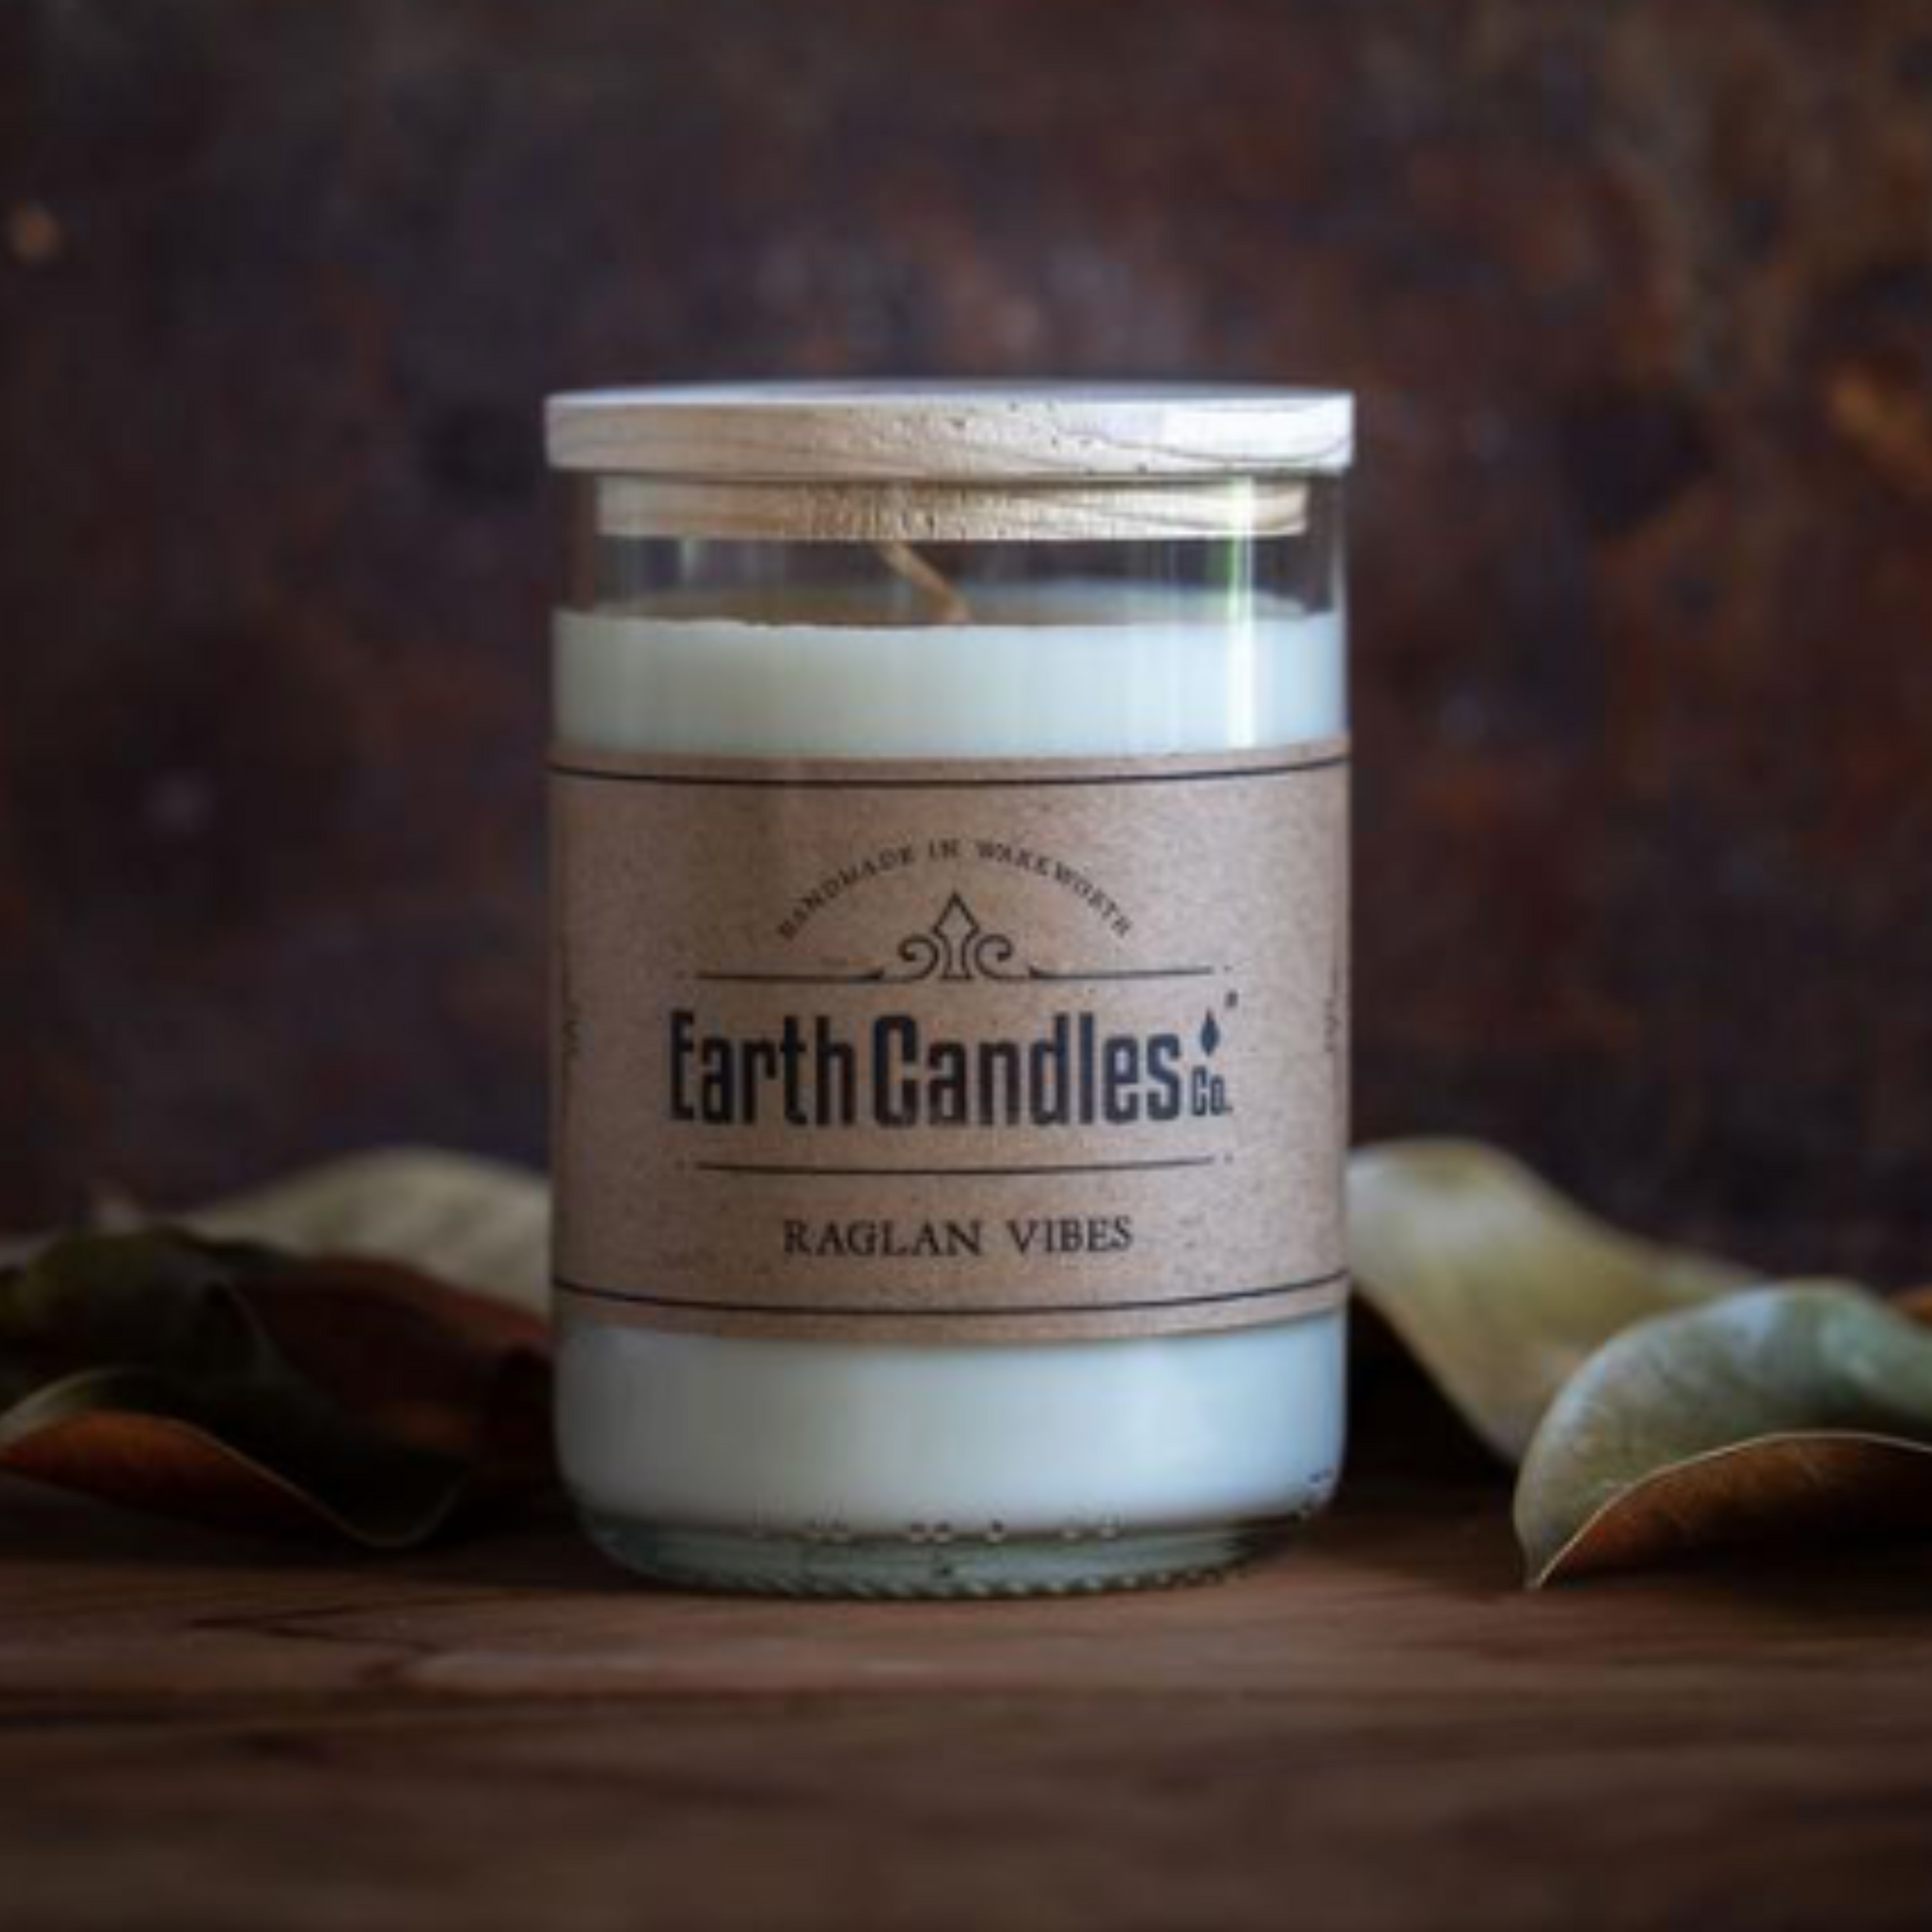 Raglan Vibes Soy Candle from Earth candles. Proudly made in New Zealand from re purposed bottles. This one is 360 grams